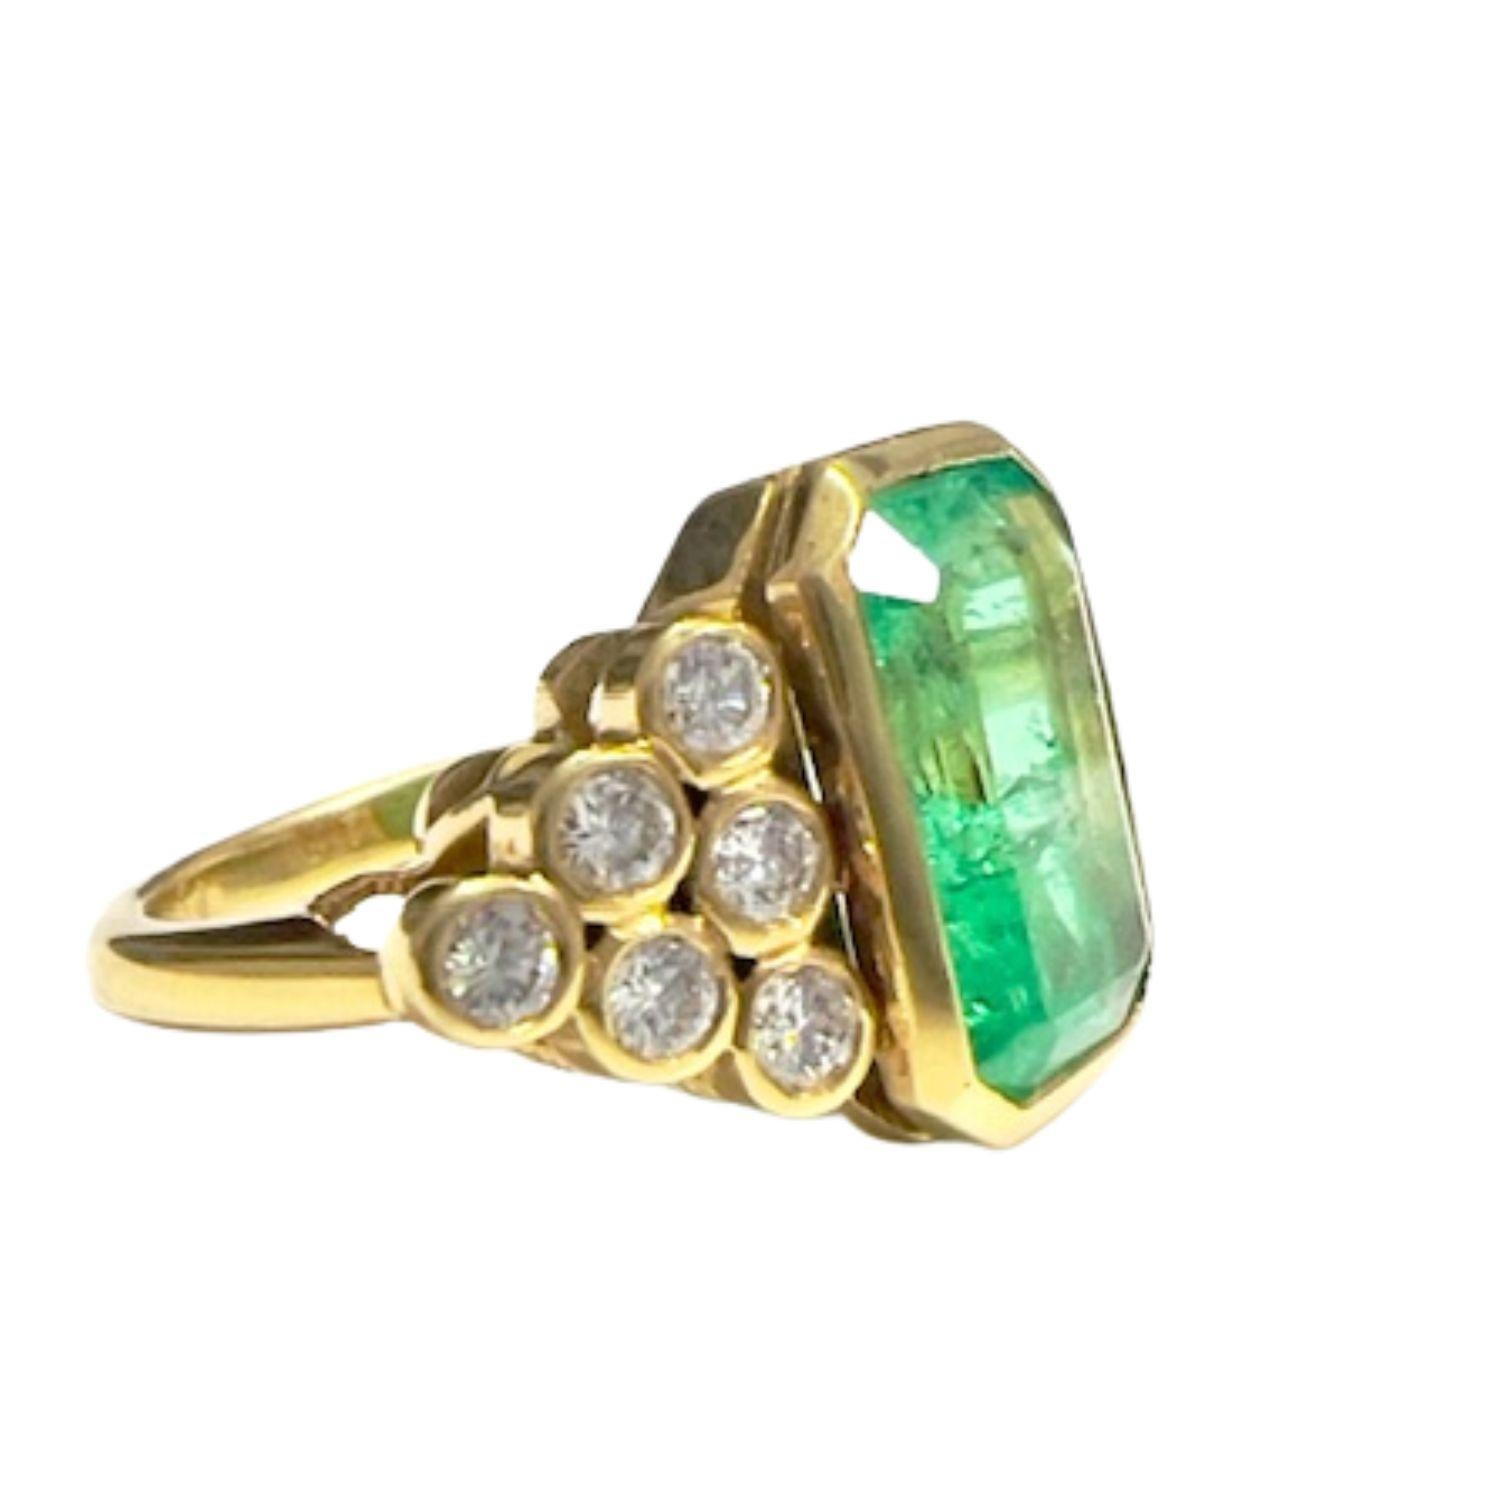 Contemporary 20th-century with central emerald and diamonds yellow Gold Ring

Weight: 7.80 grams

Size: 14/54

Gemological description:
Baguette-cut emerald center weighing 3.80 ct Origin: Colombia
Diamonds (12) 0.60 cts 
Clarity and quality: VS SI